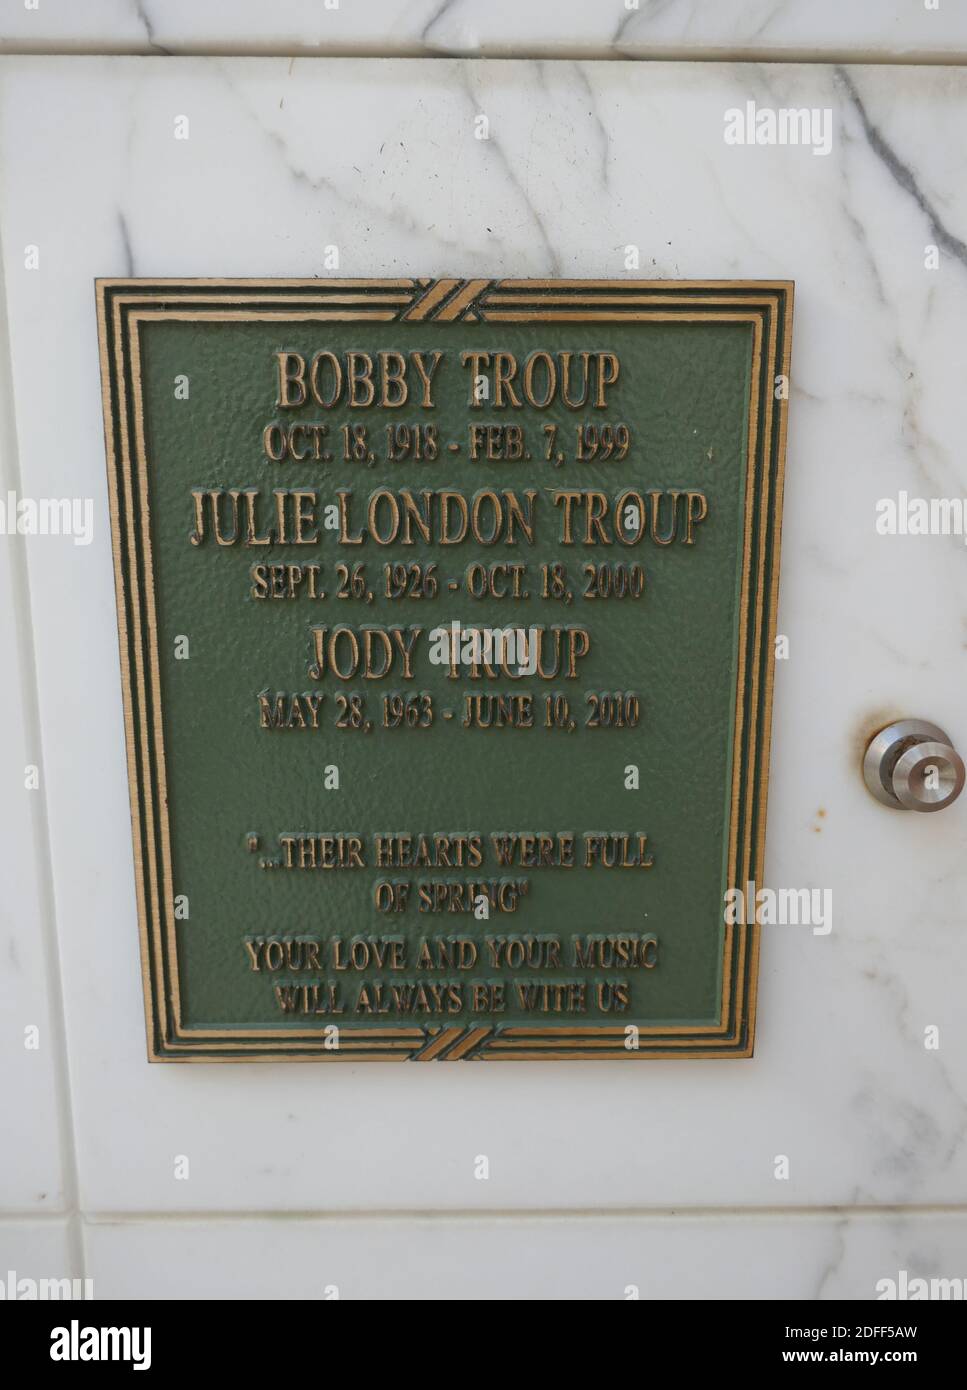 Los Angeles, California, USA 3rd December 2020 A general view of atmosphere of actor Bobby Troup's Grave and singer Julie London's grave at Forest Lawn Memorial Park Hollywood Hills on December 3, 2020 in Los Angeles, California, USA. Photo by Barry King/Alamy Stock Photo Stock Photo